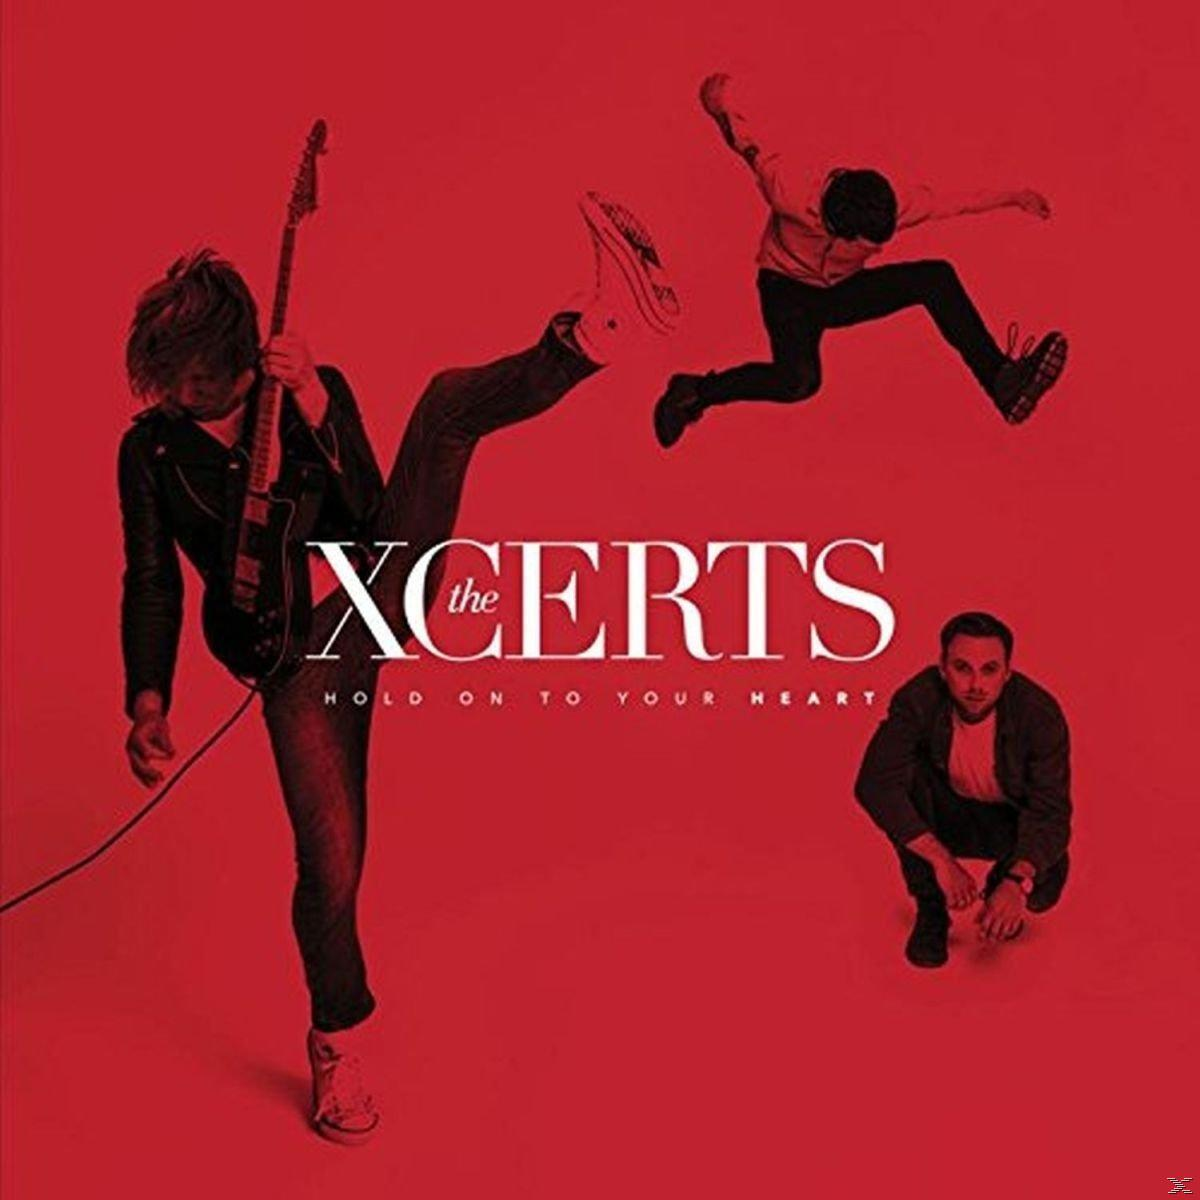 The Xcerts - Hold On Your Heart To (LP) (Vinyl) 